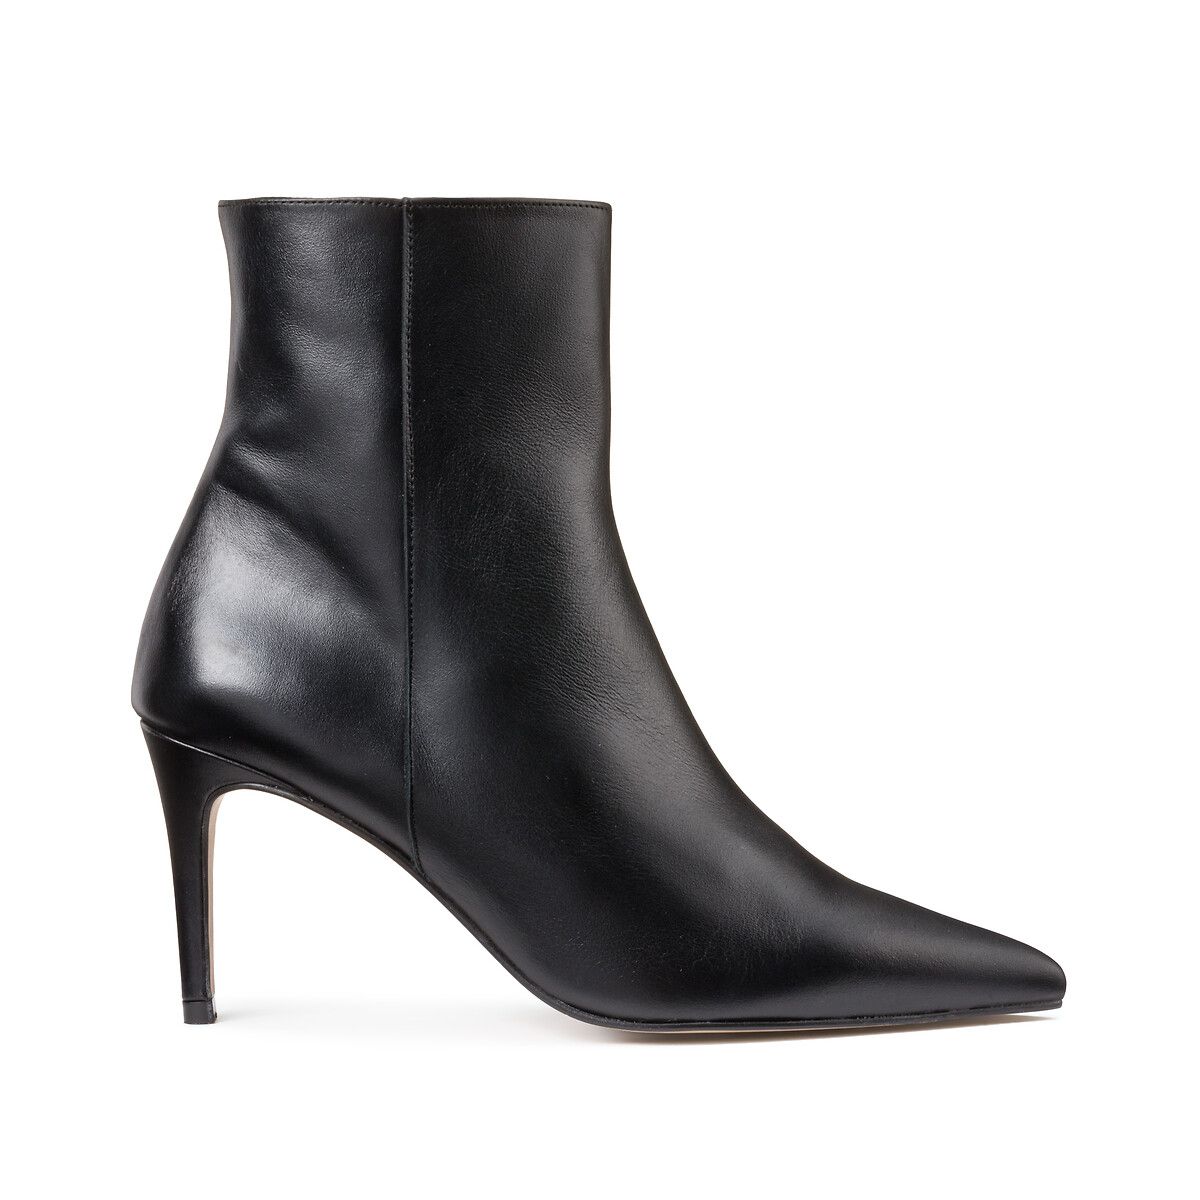 Leather Ankle Boots with Stiletto Heel | La Redoute (UK)